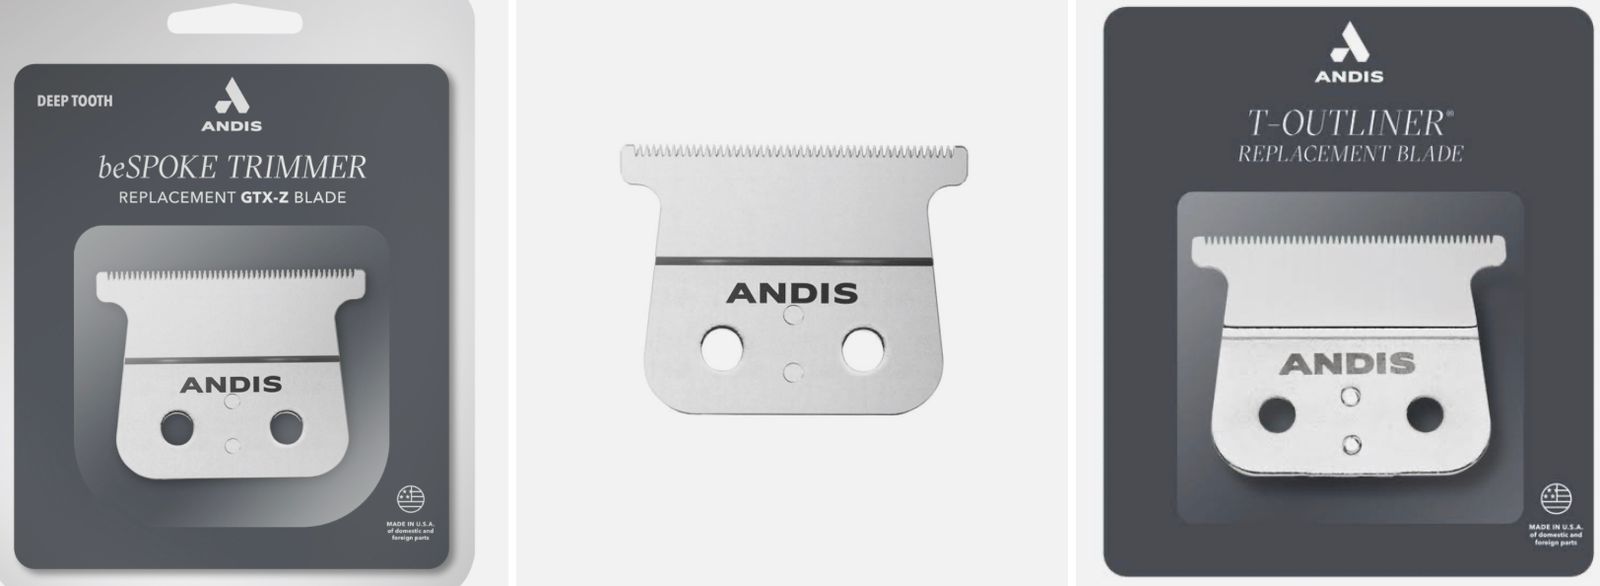 AND560149-ANDIS BLADE BESPOKE TRIMMER REPLACEMENT GTX-Z DEEP TOOTH #560149(040102003653)